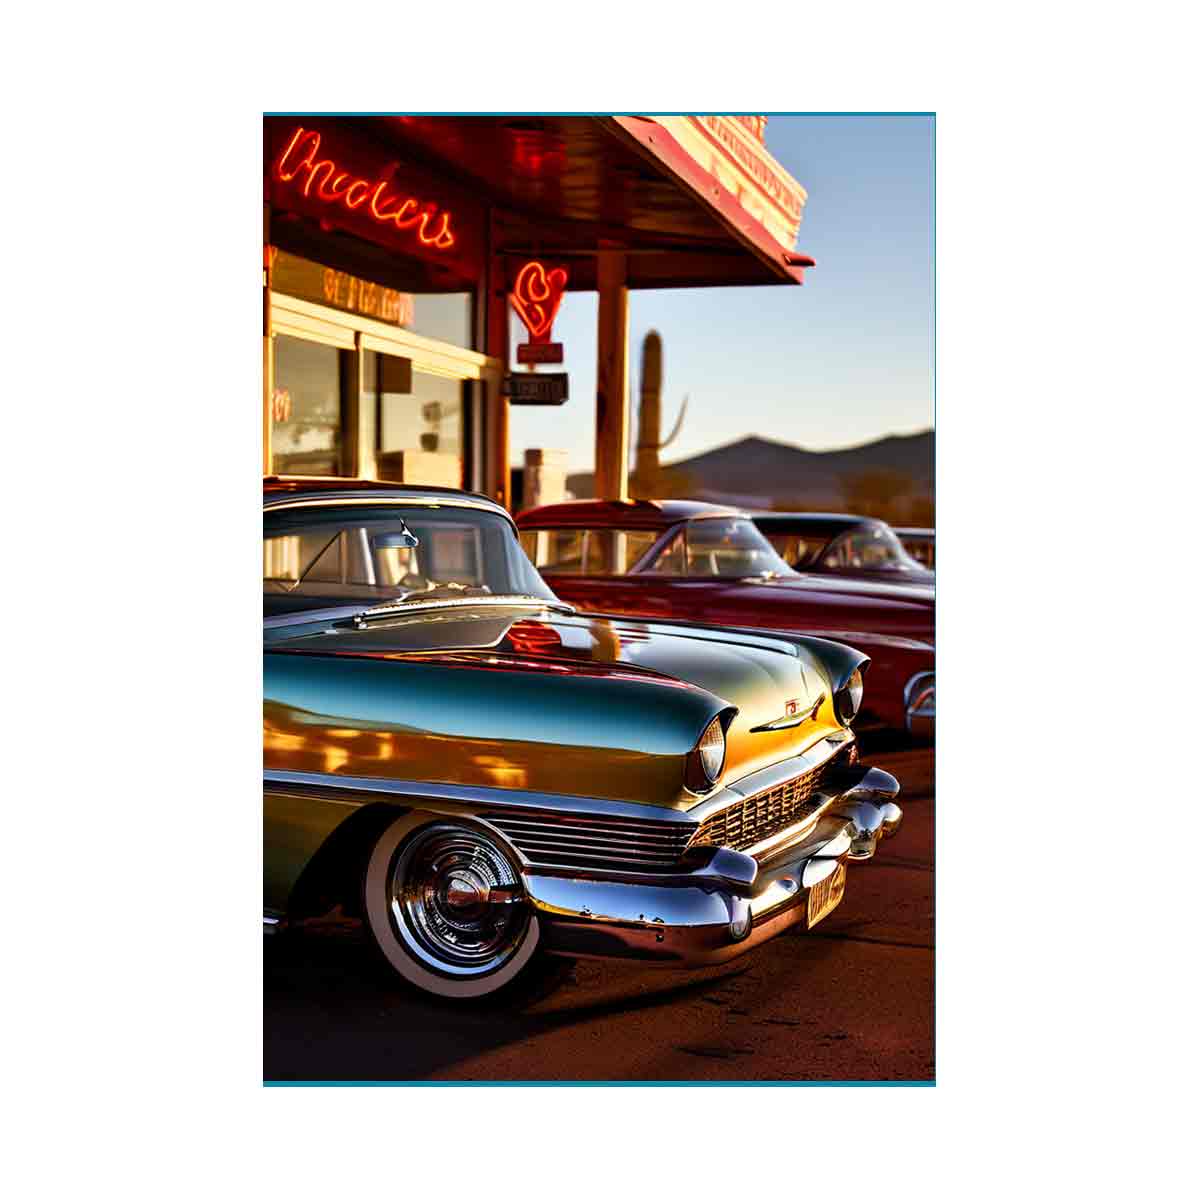 Classic cars at diner